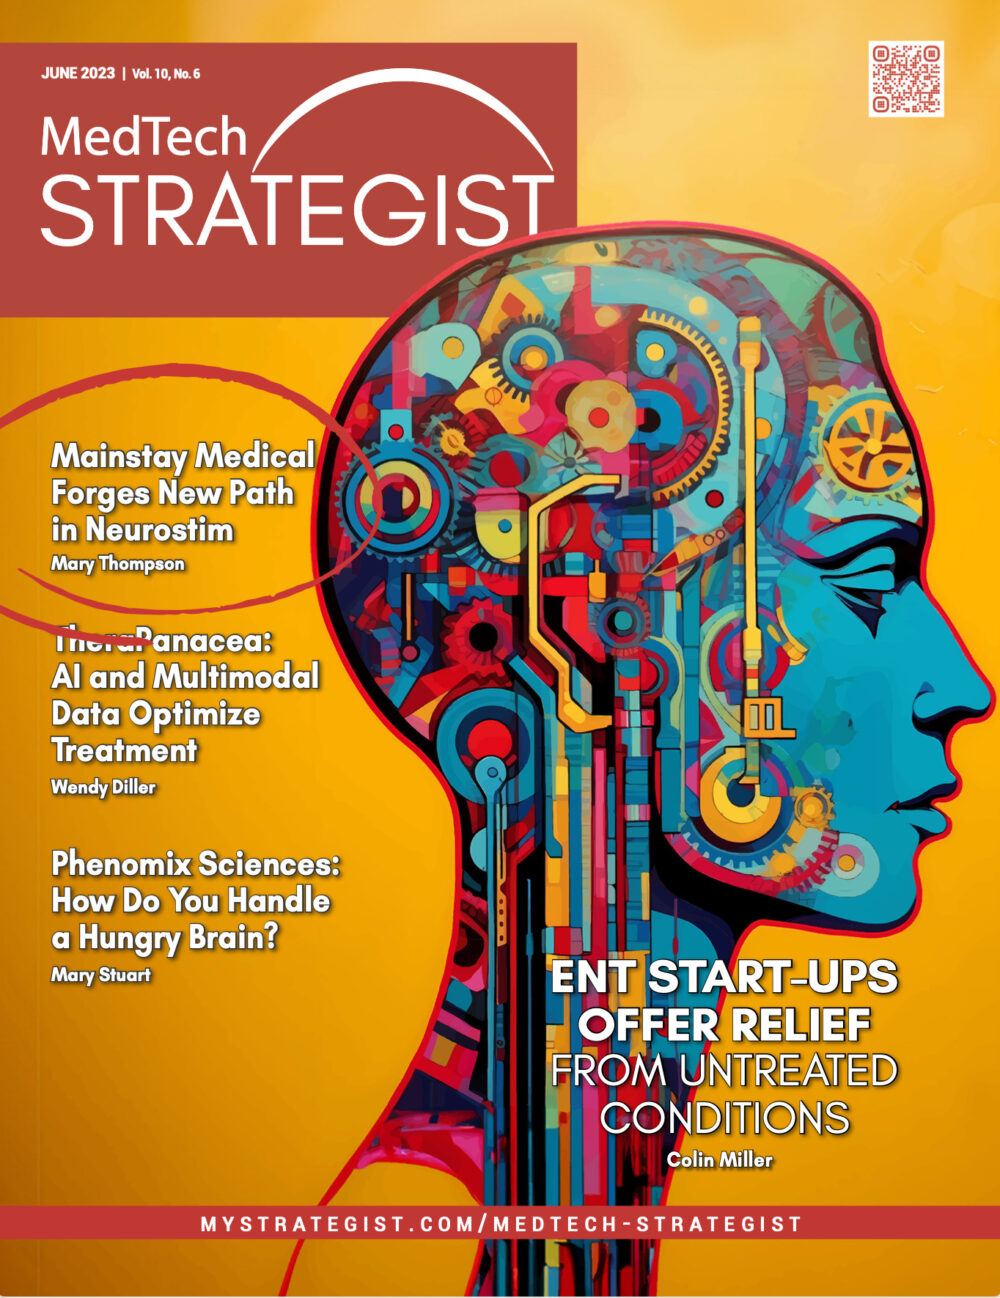 Cover of MedTech Strategist Publication with Mainstay Medical Feature